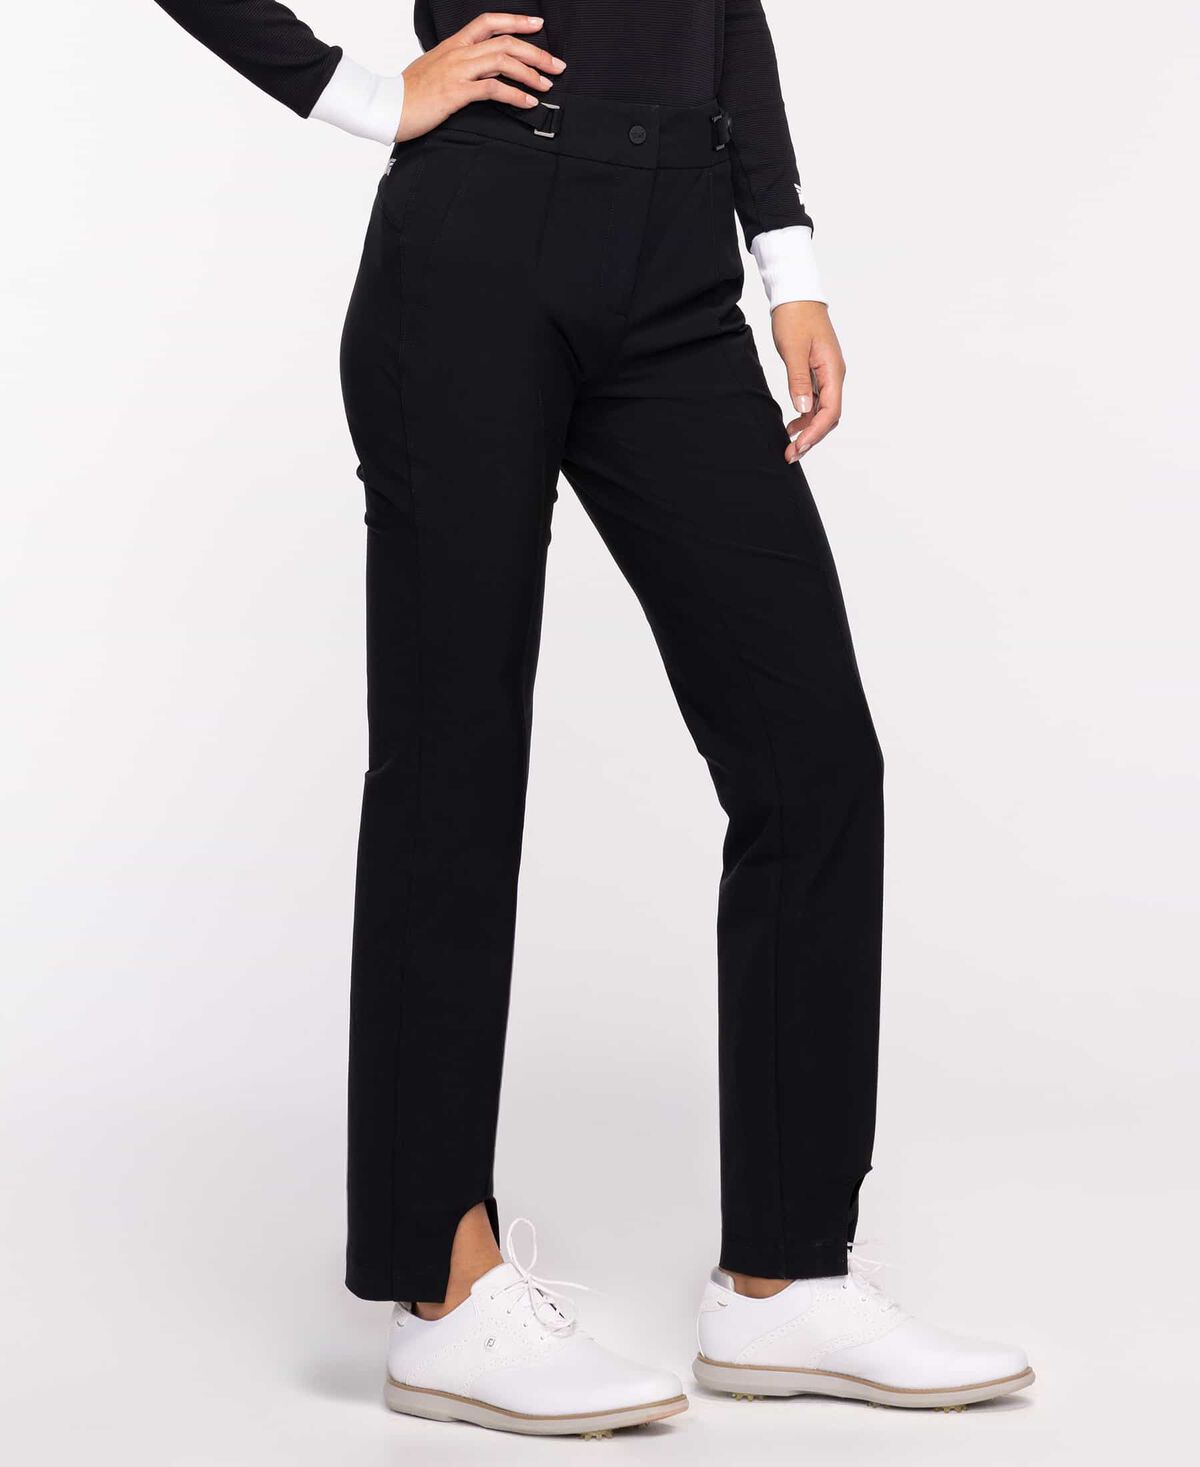 Buy Women's High-Low Ankle Golf Pant